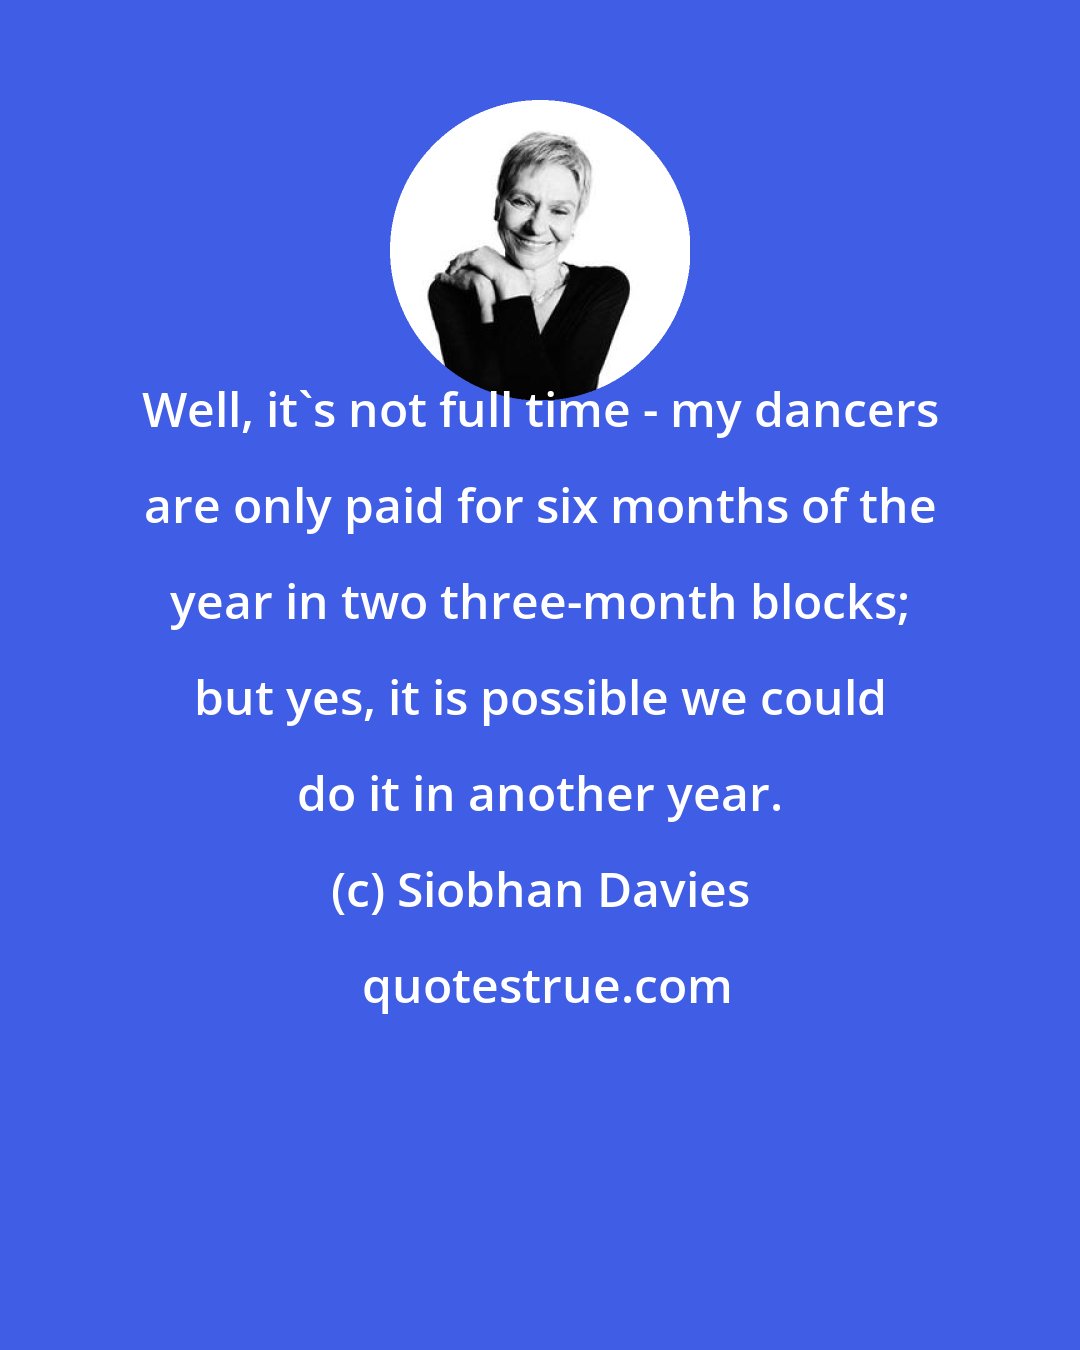 Siobhan Davies: Well, it's not full time - my dancers are only paid for six months of the year in two three-month blocks; but yes, it is possible we could do it in another year.